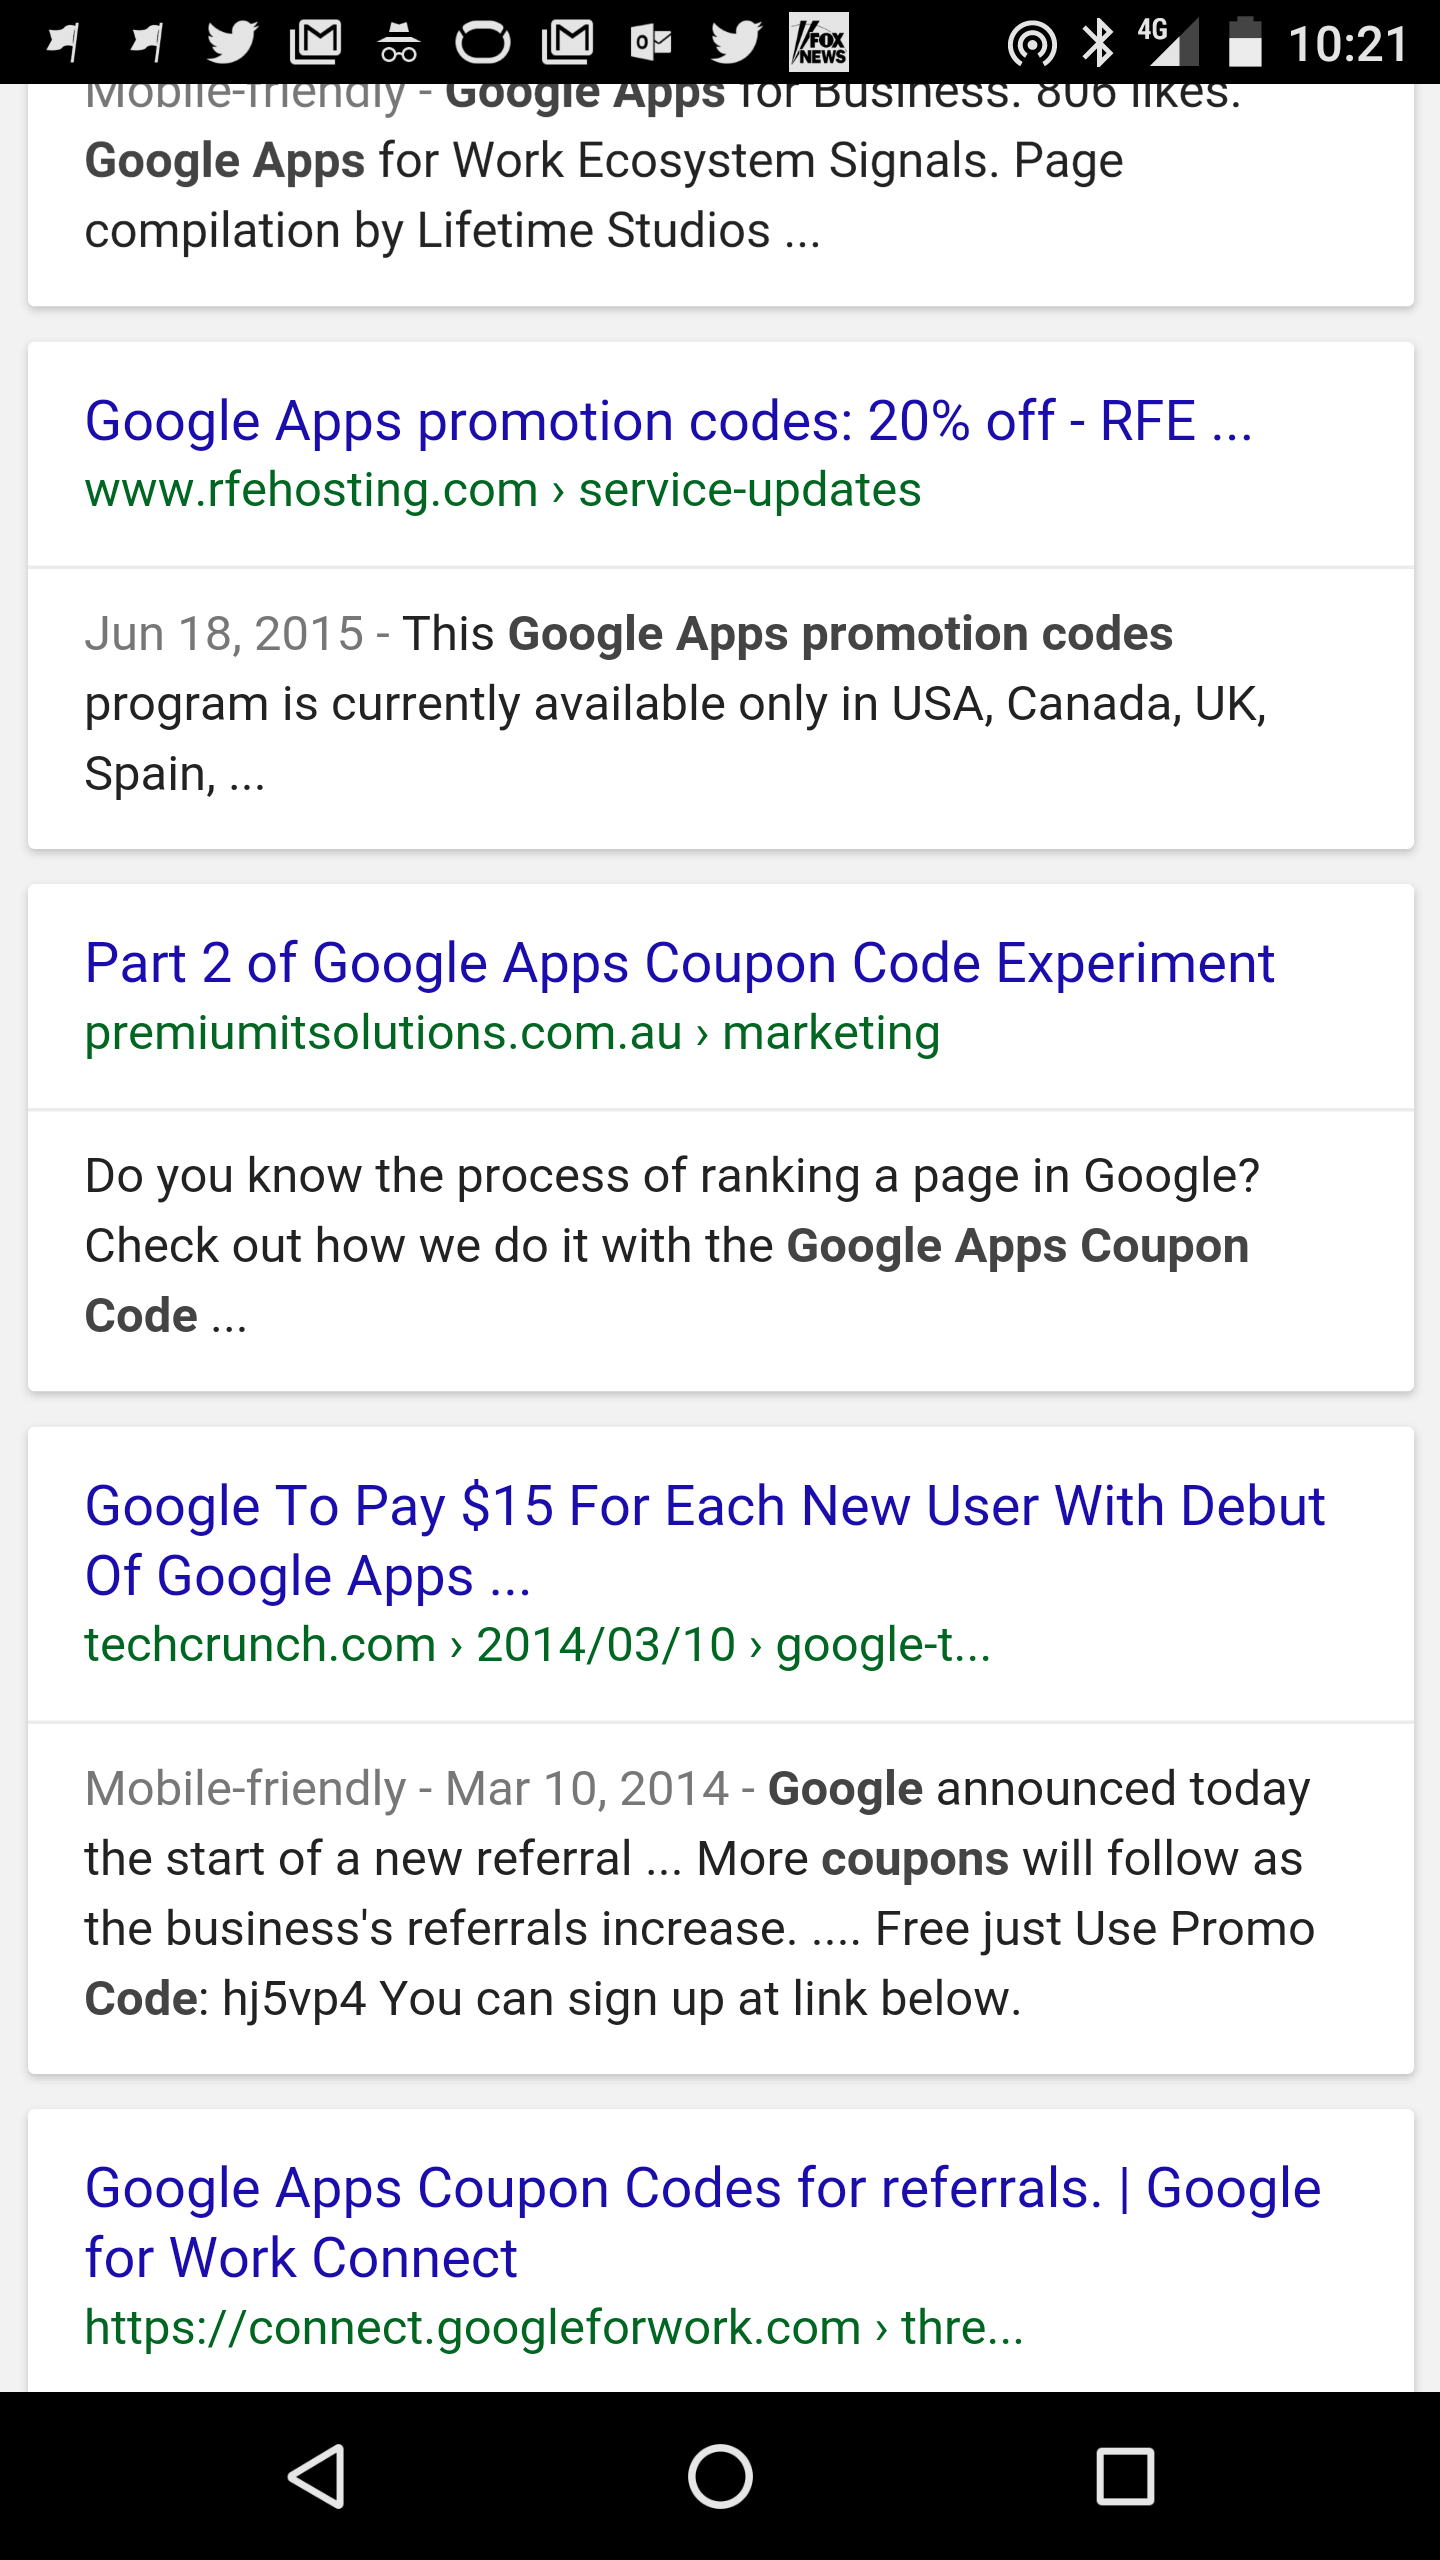 SERP position 16 for Google Apps Coupon Code experimentSERP position 16 for Google Apps Coupon Code experiment on a Mobile Device